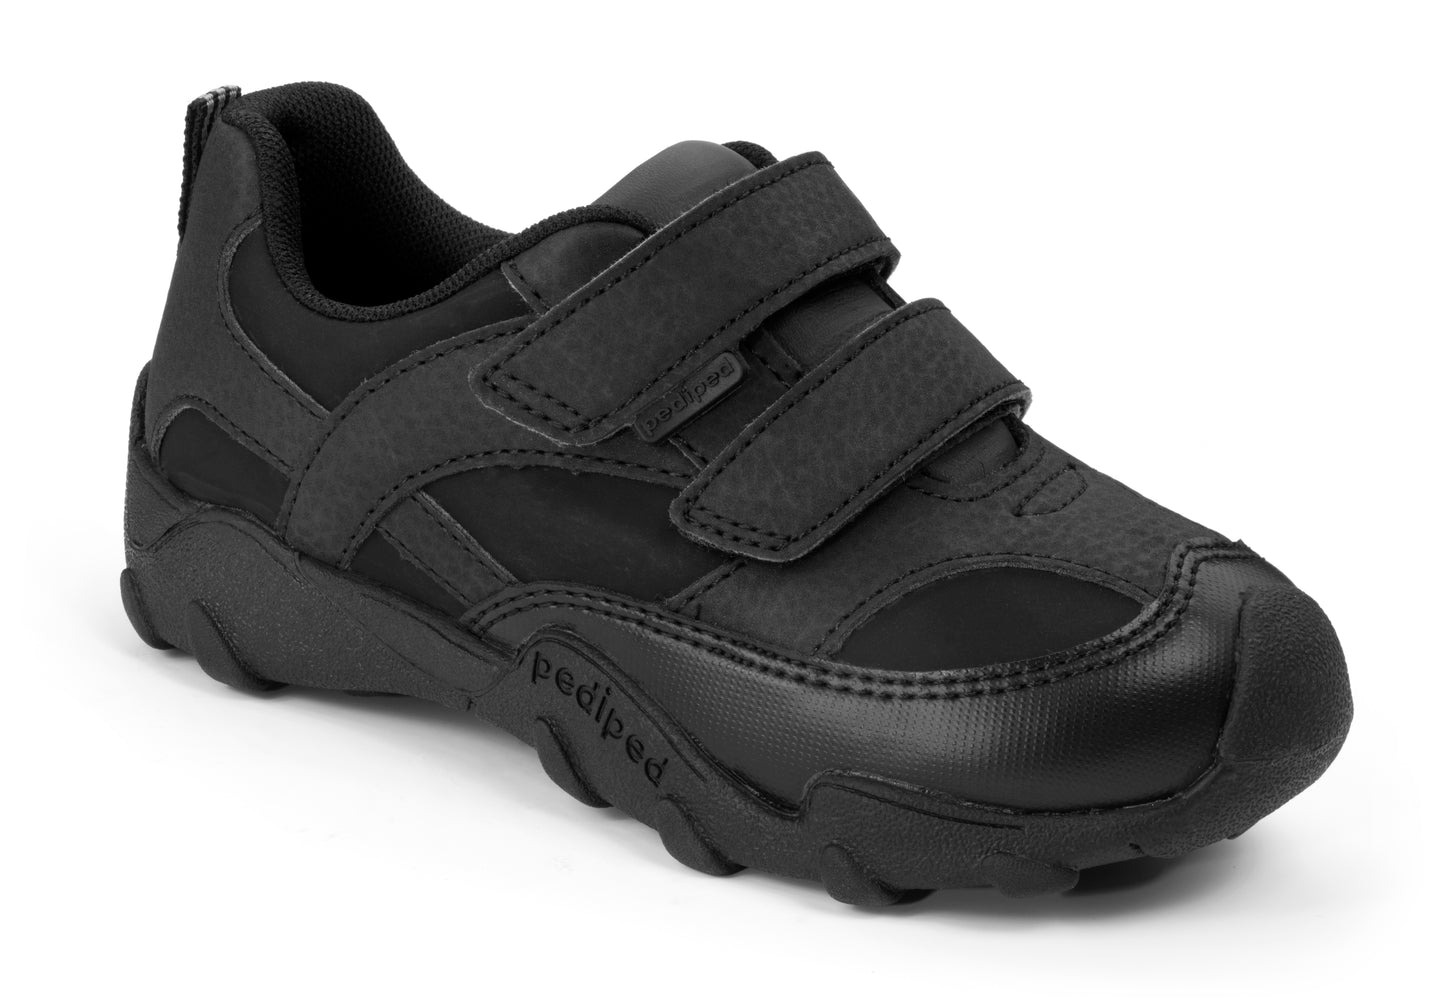 Black school shoes by Pediped